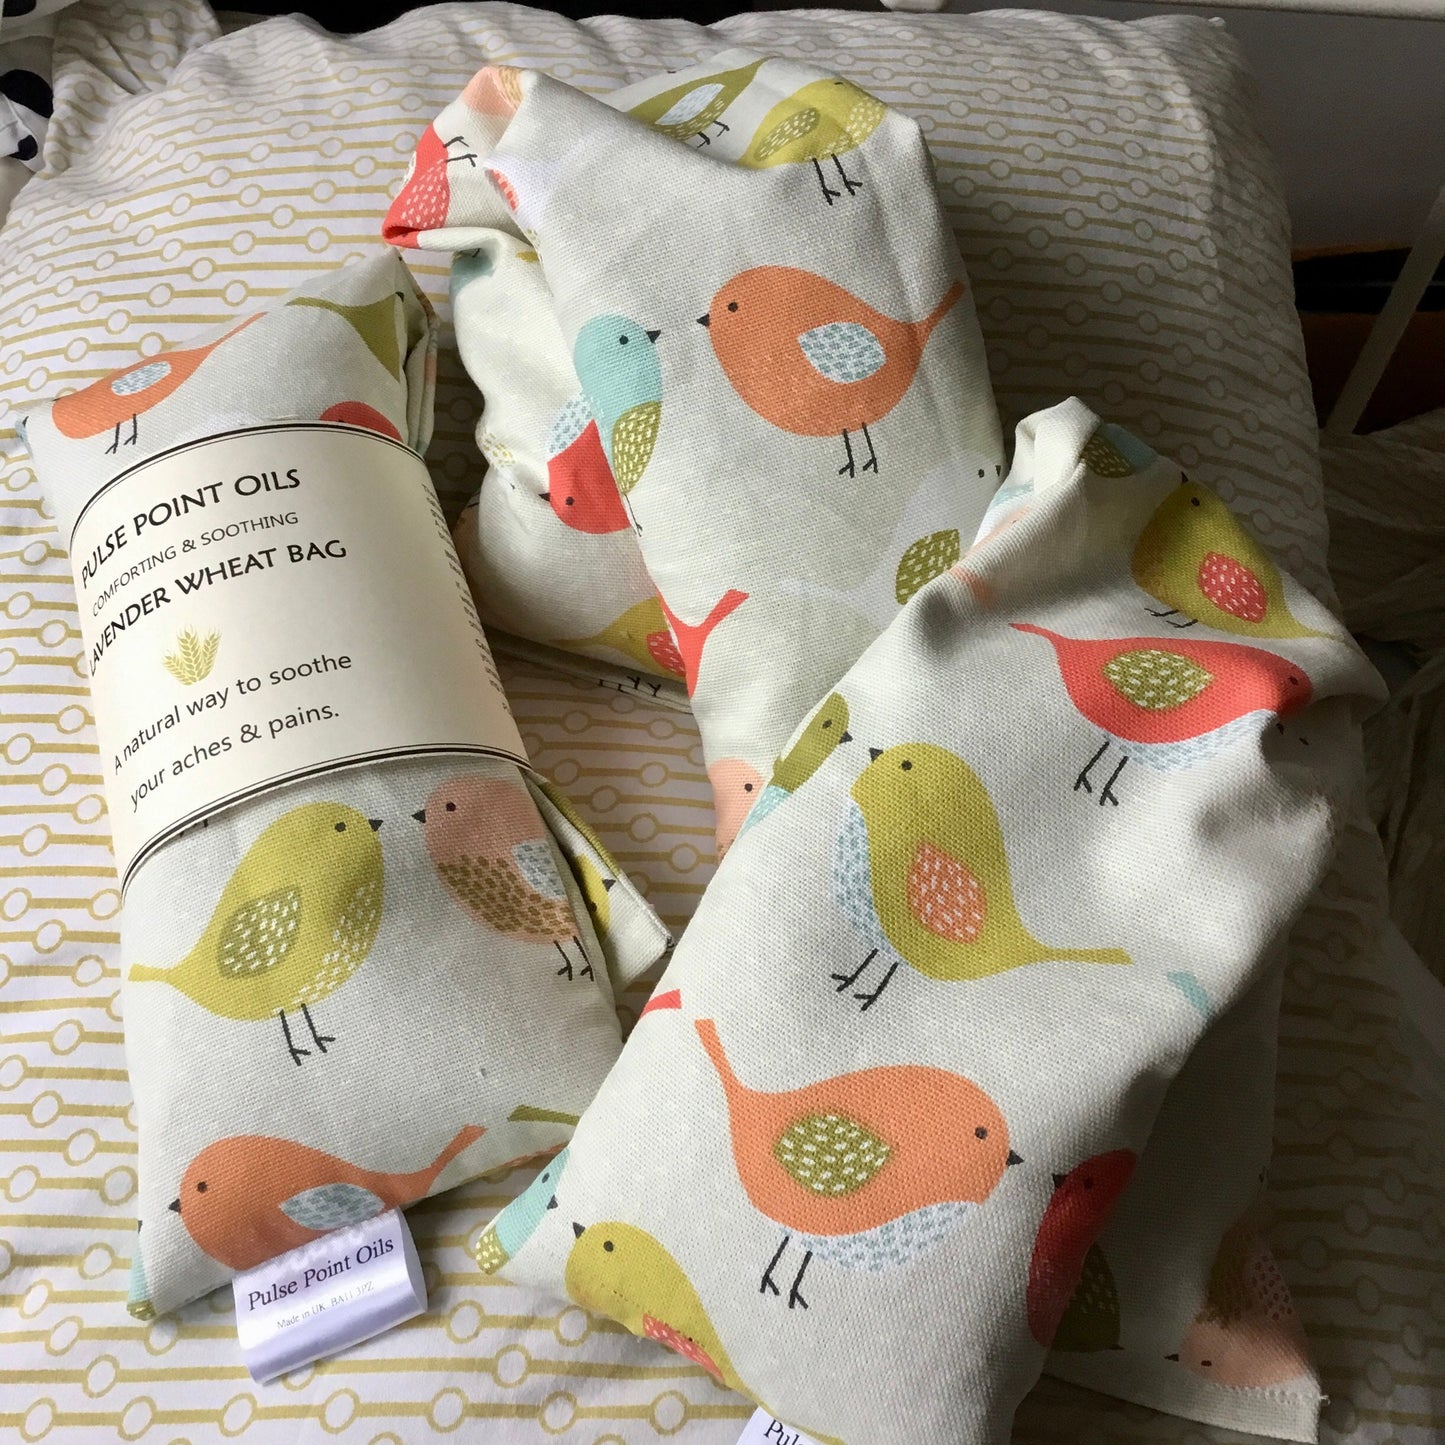 Bird printed cotton fabric wheat bags for children. warming and comforting when illness strikes. hot/cold compress for kids